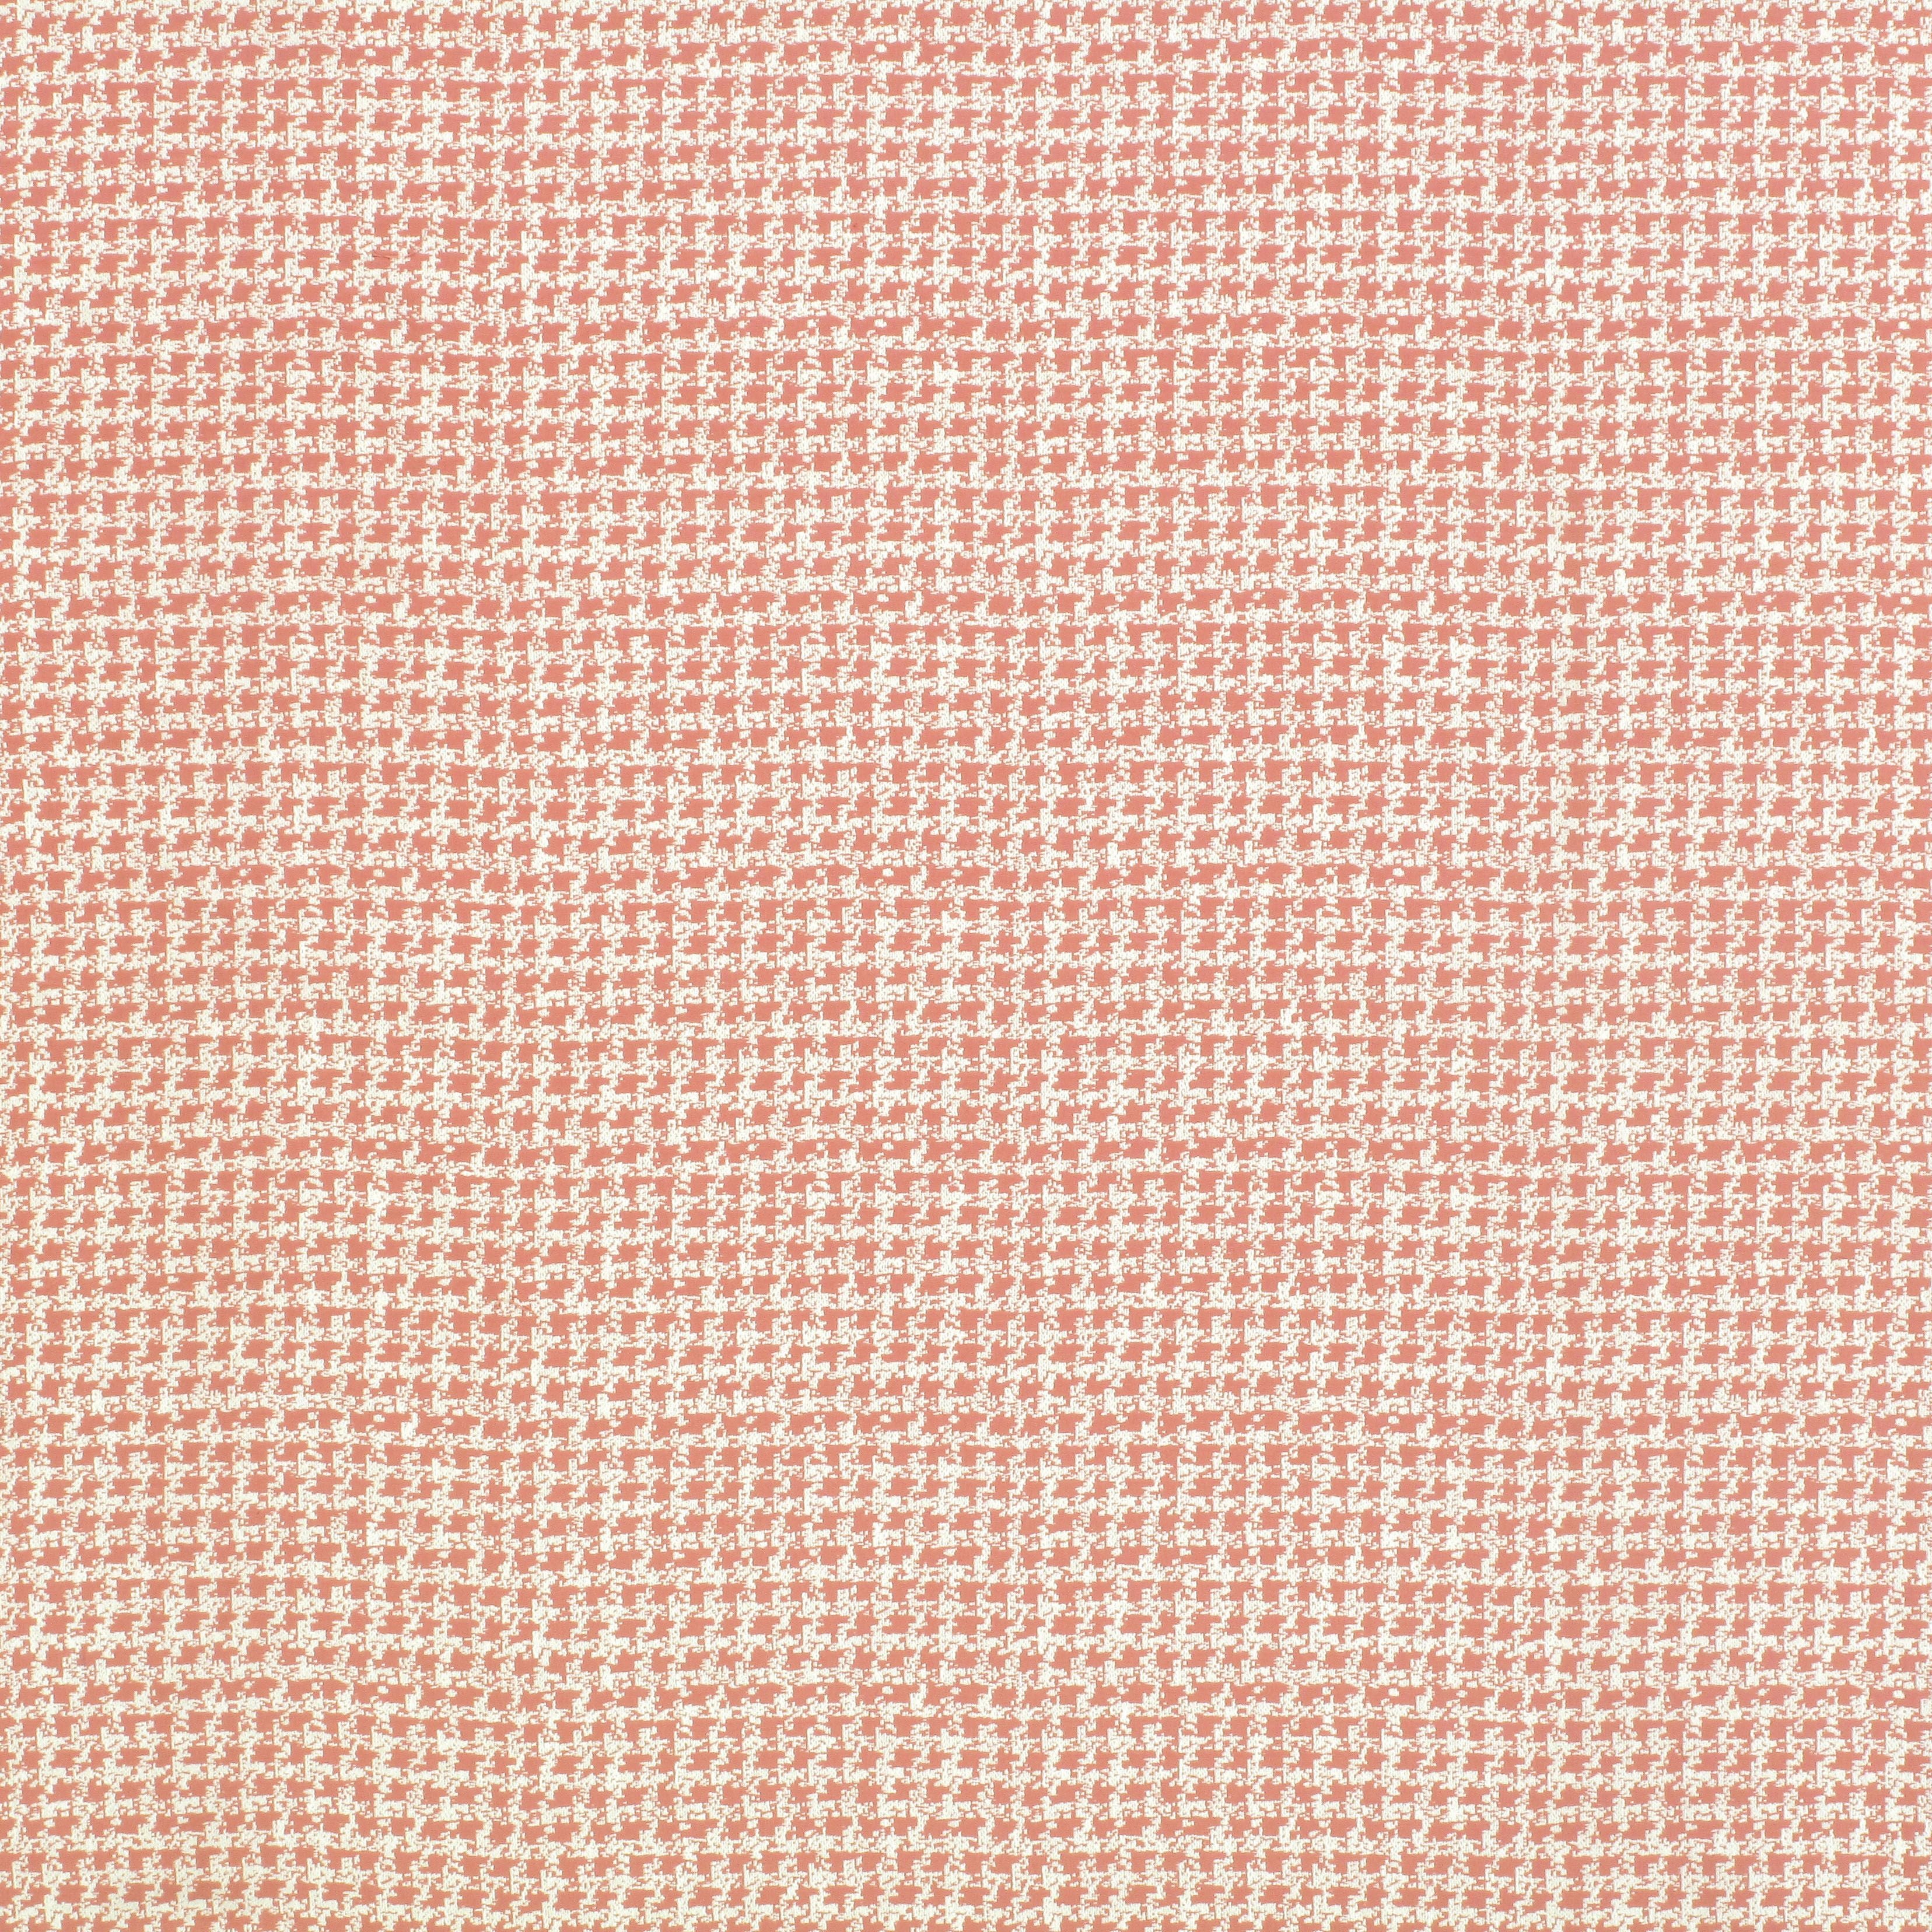 Downton fabric in rose color - pattern number TL 00021393 - by Scalamandre in the Old World Weavers collection